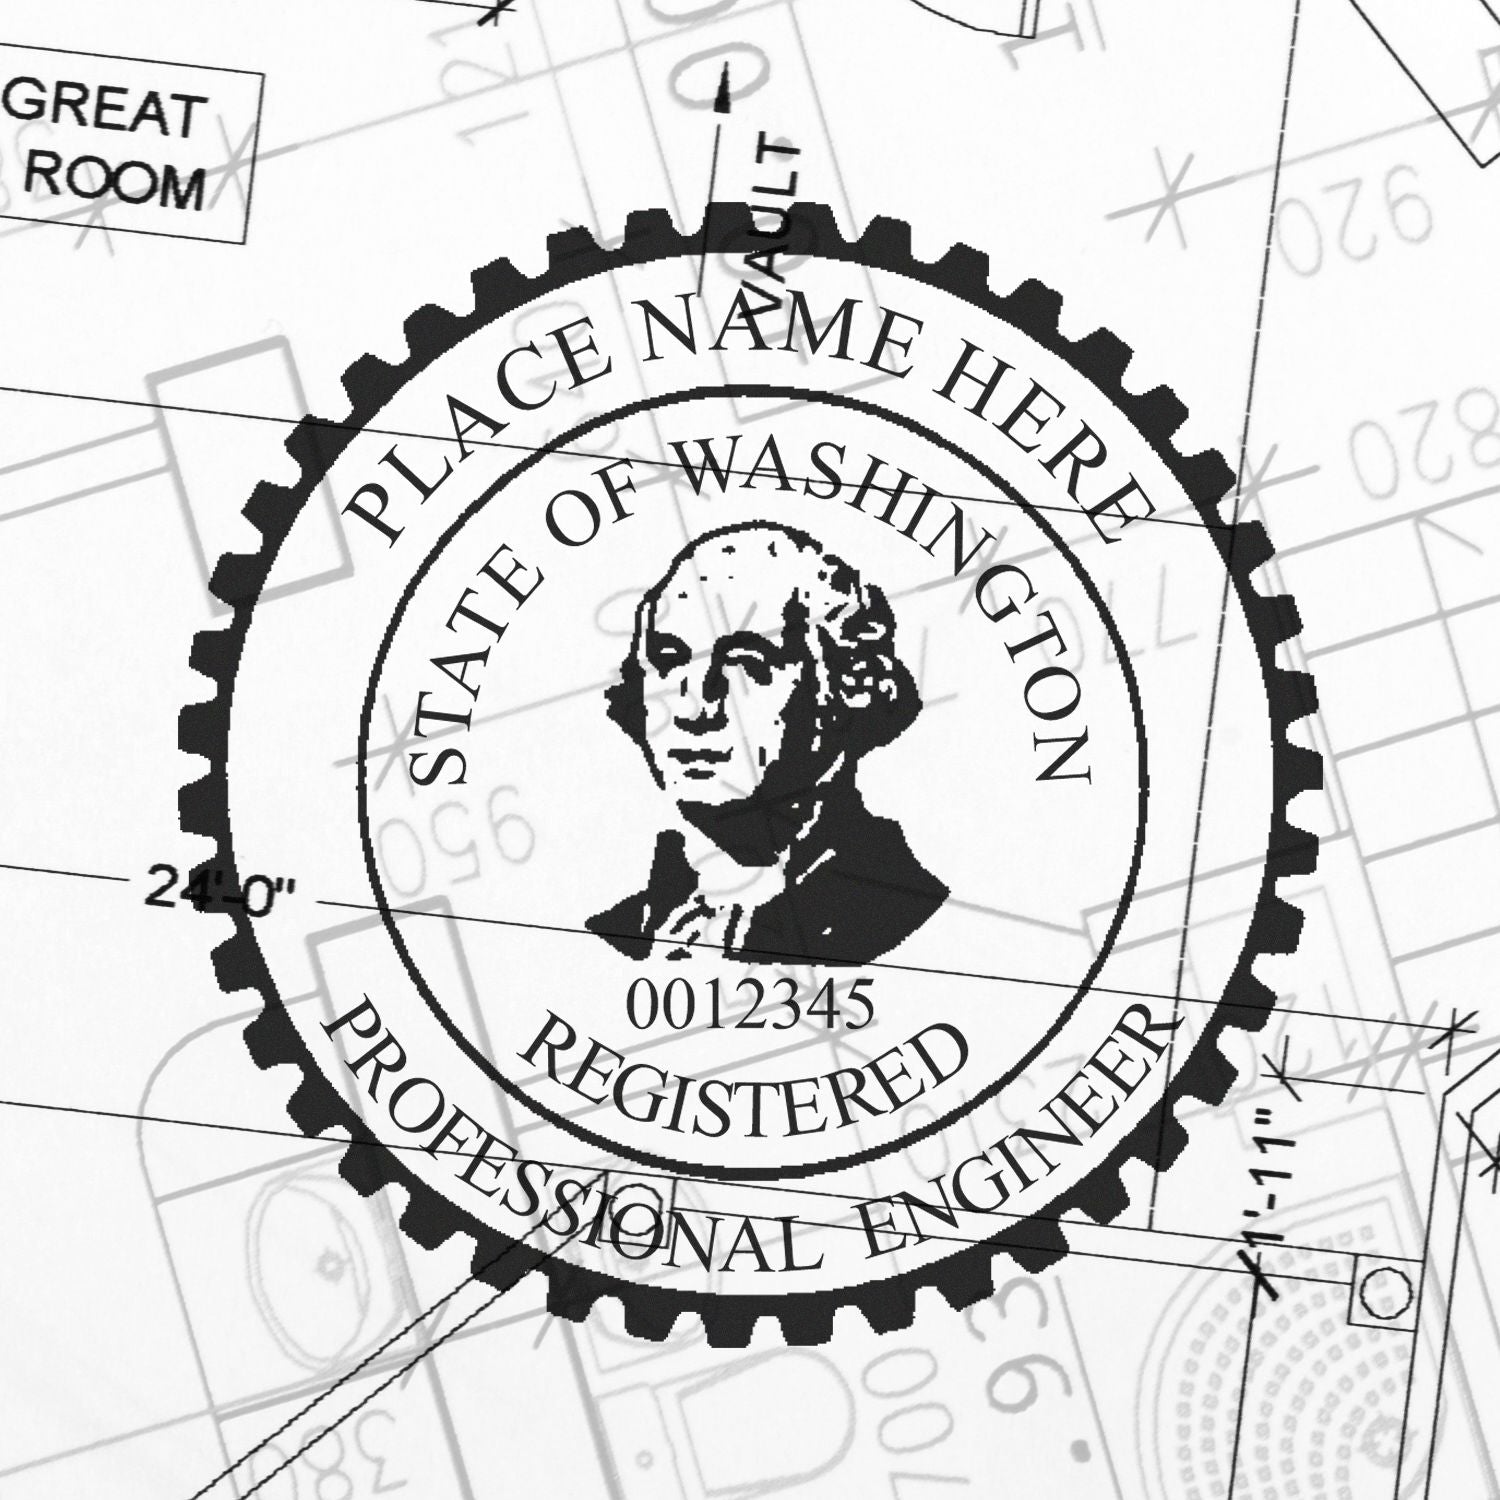 The main image for the Digital Washington PE Stamp and Electronic Seal for Washington Engineer depicting a sample of the imprint and electronic files